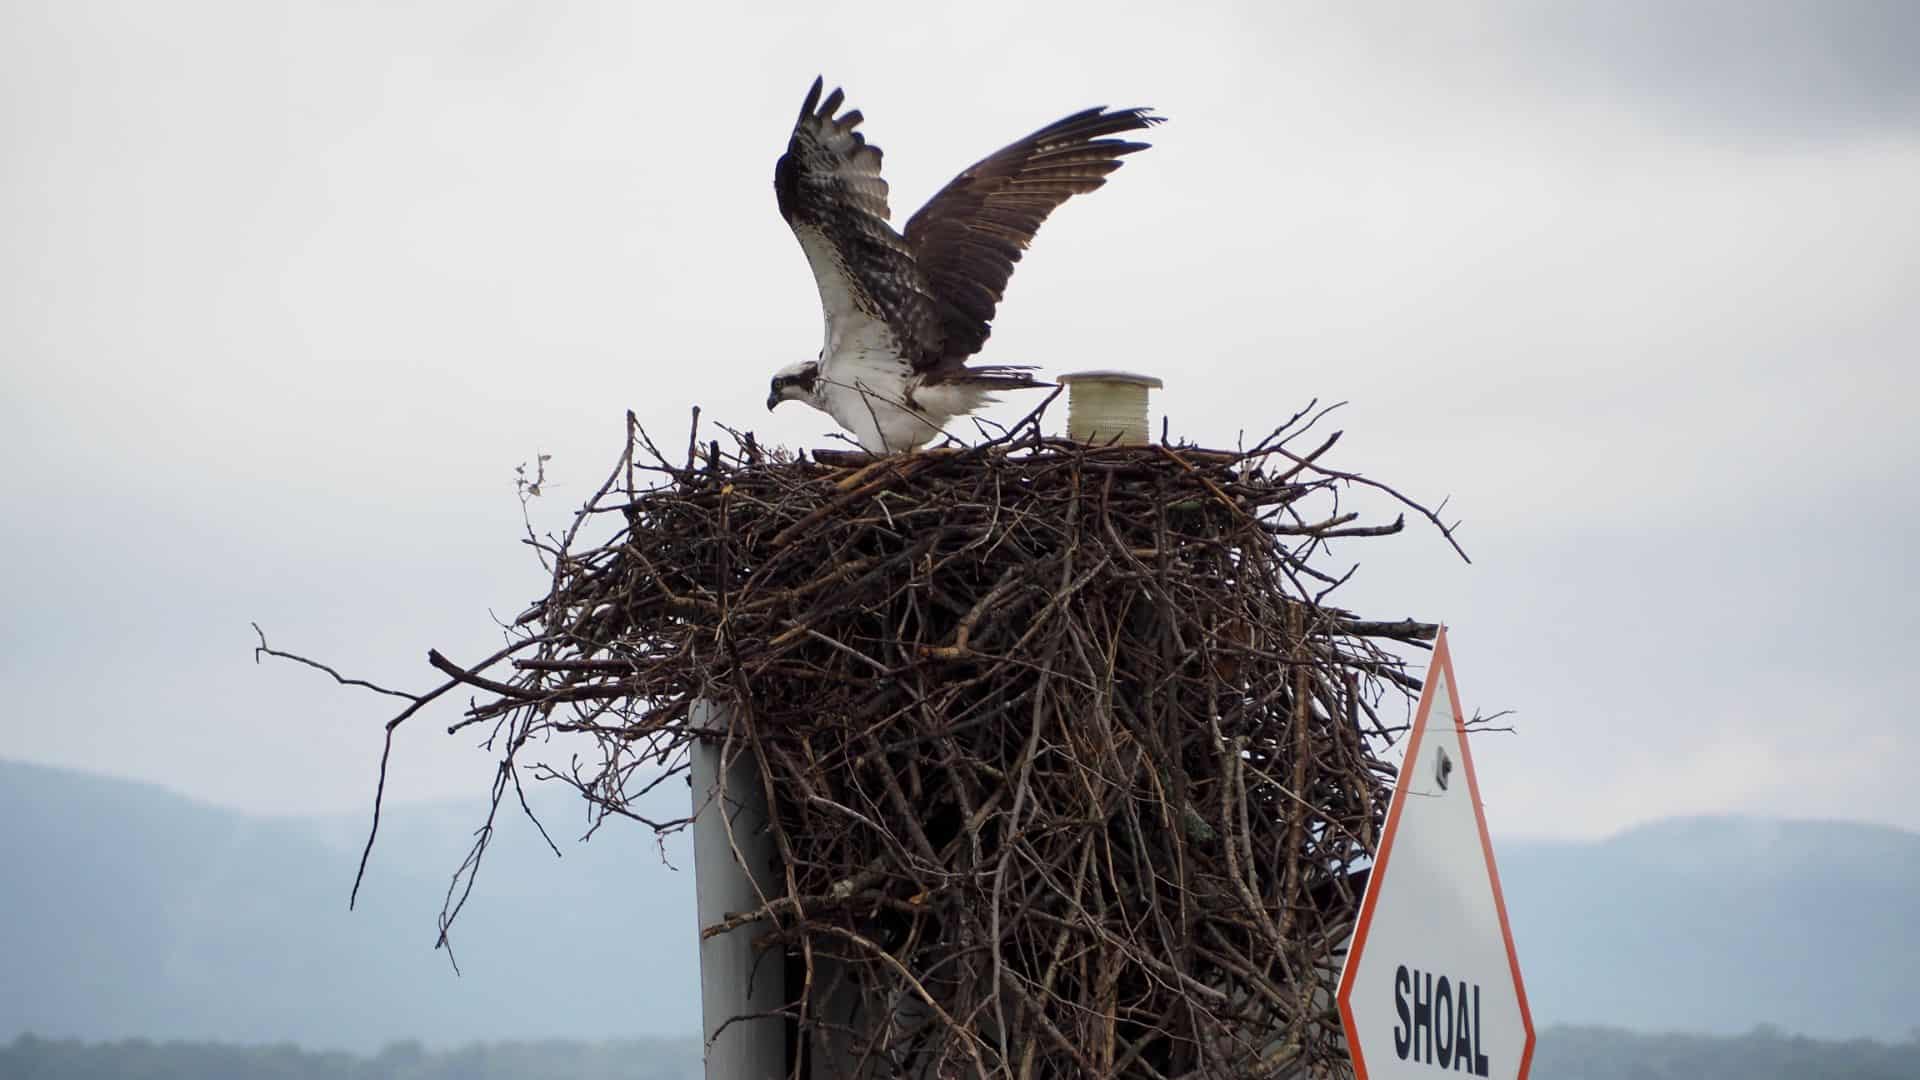 Large white and brown bird landing on top of a large nest